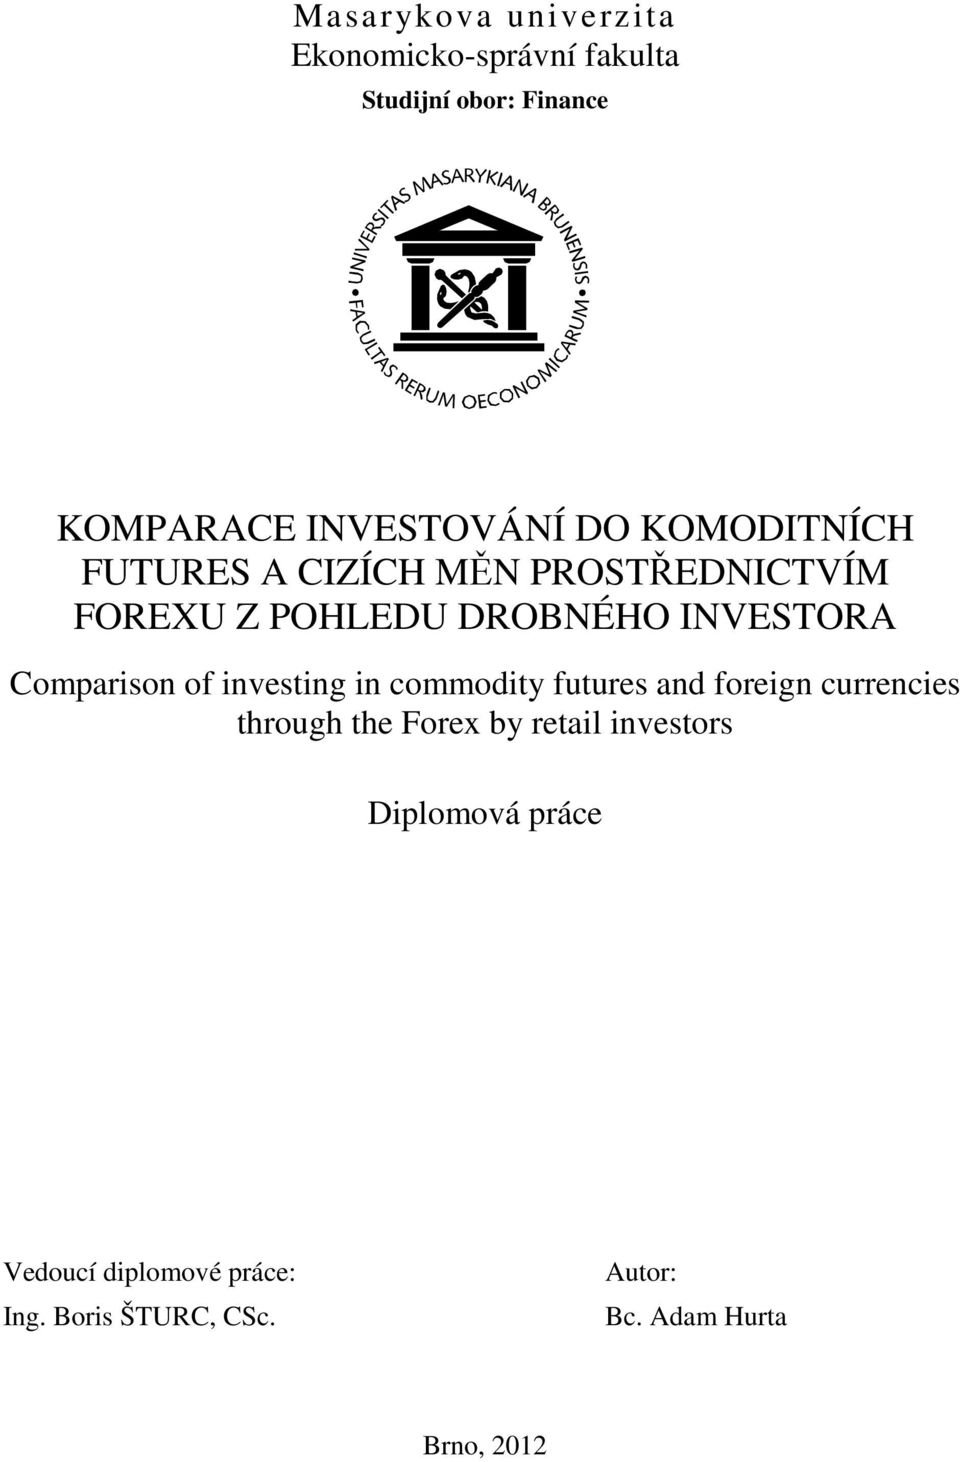 Comparison of investing in commodity futures and foreign currencies through the Forex by retail